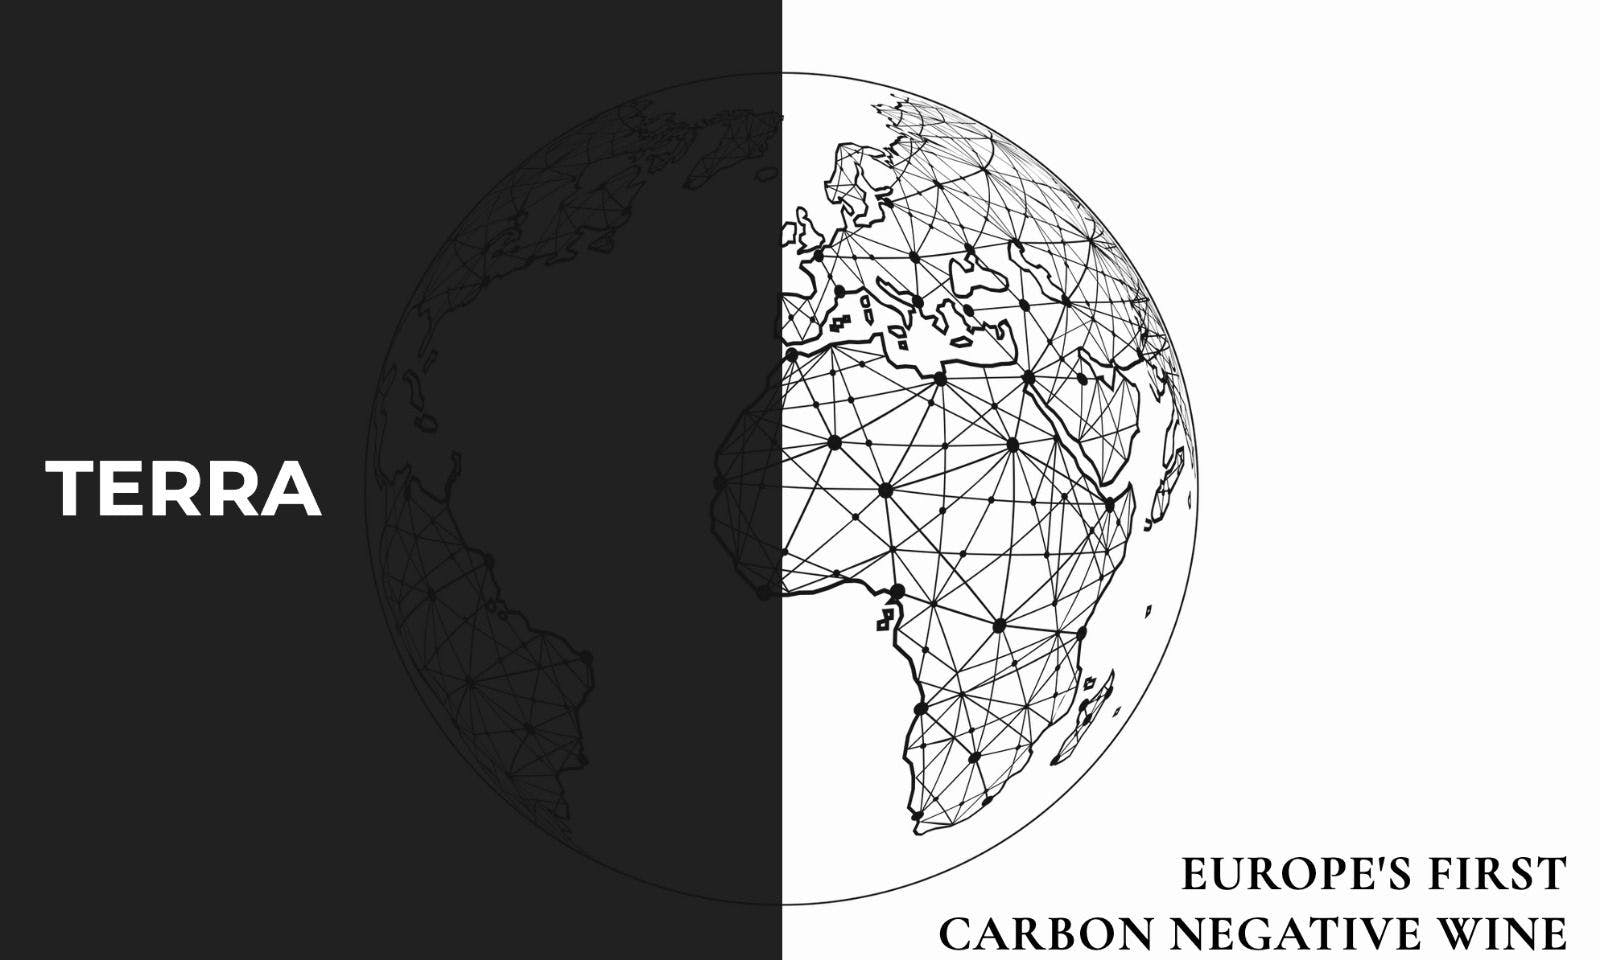 Terra - Europe's first Carbon negative wine